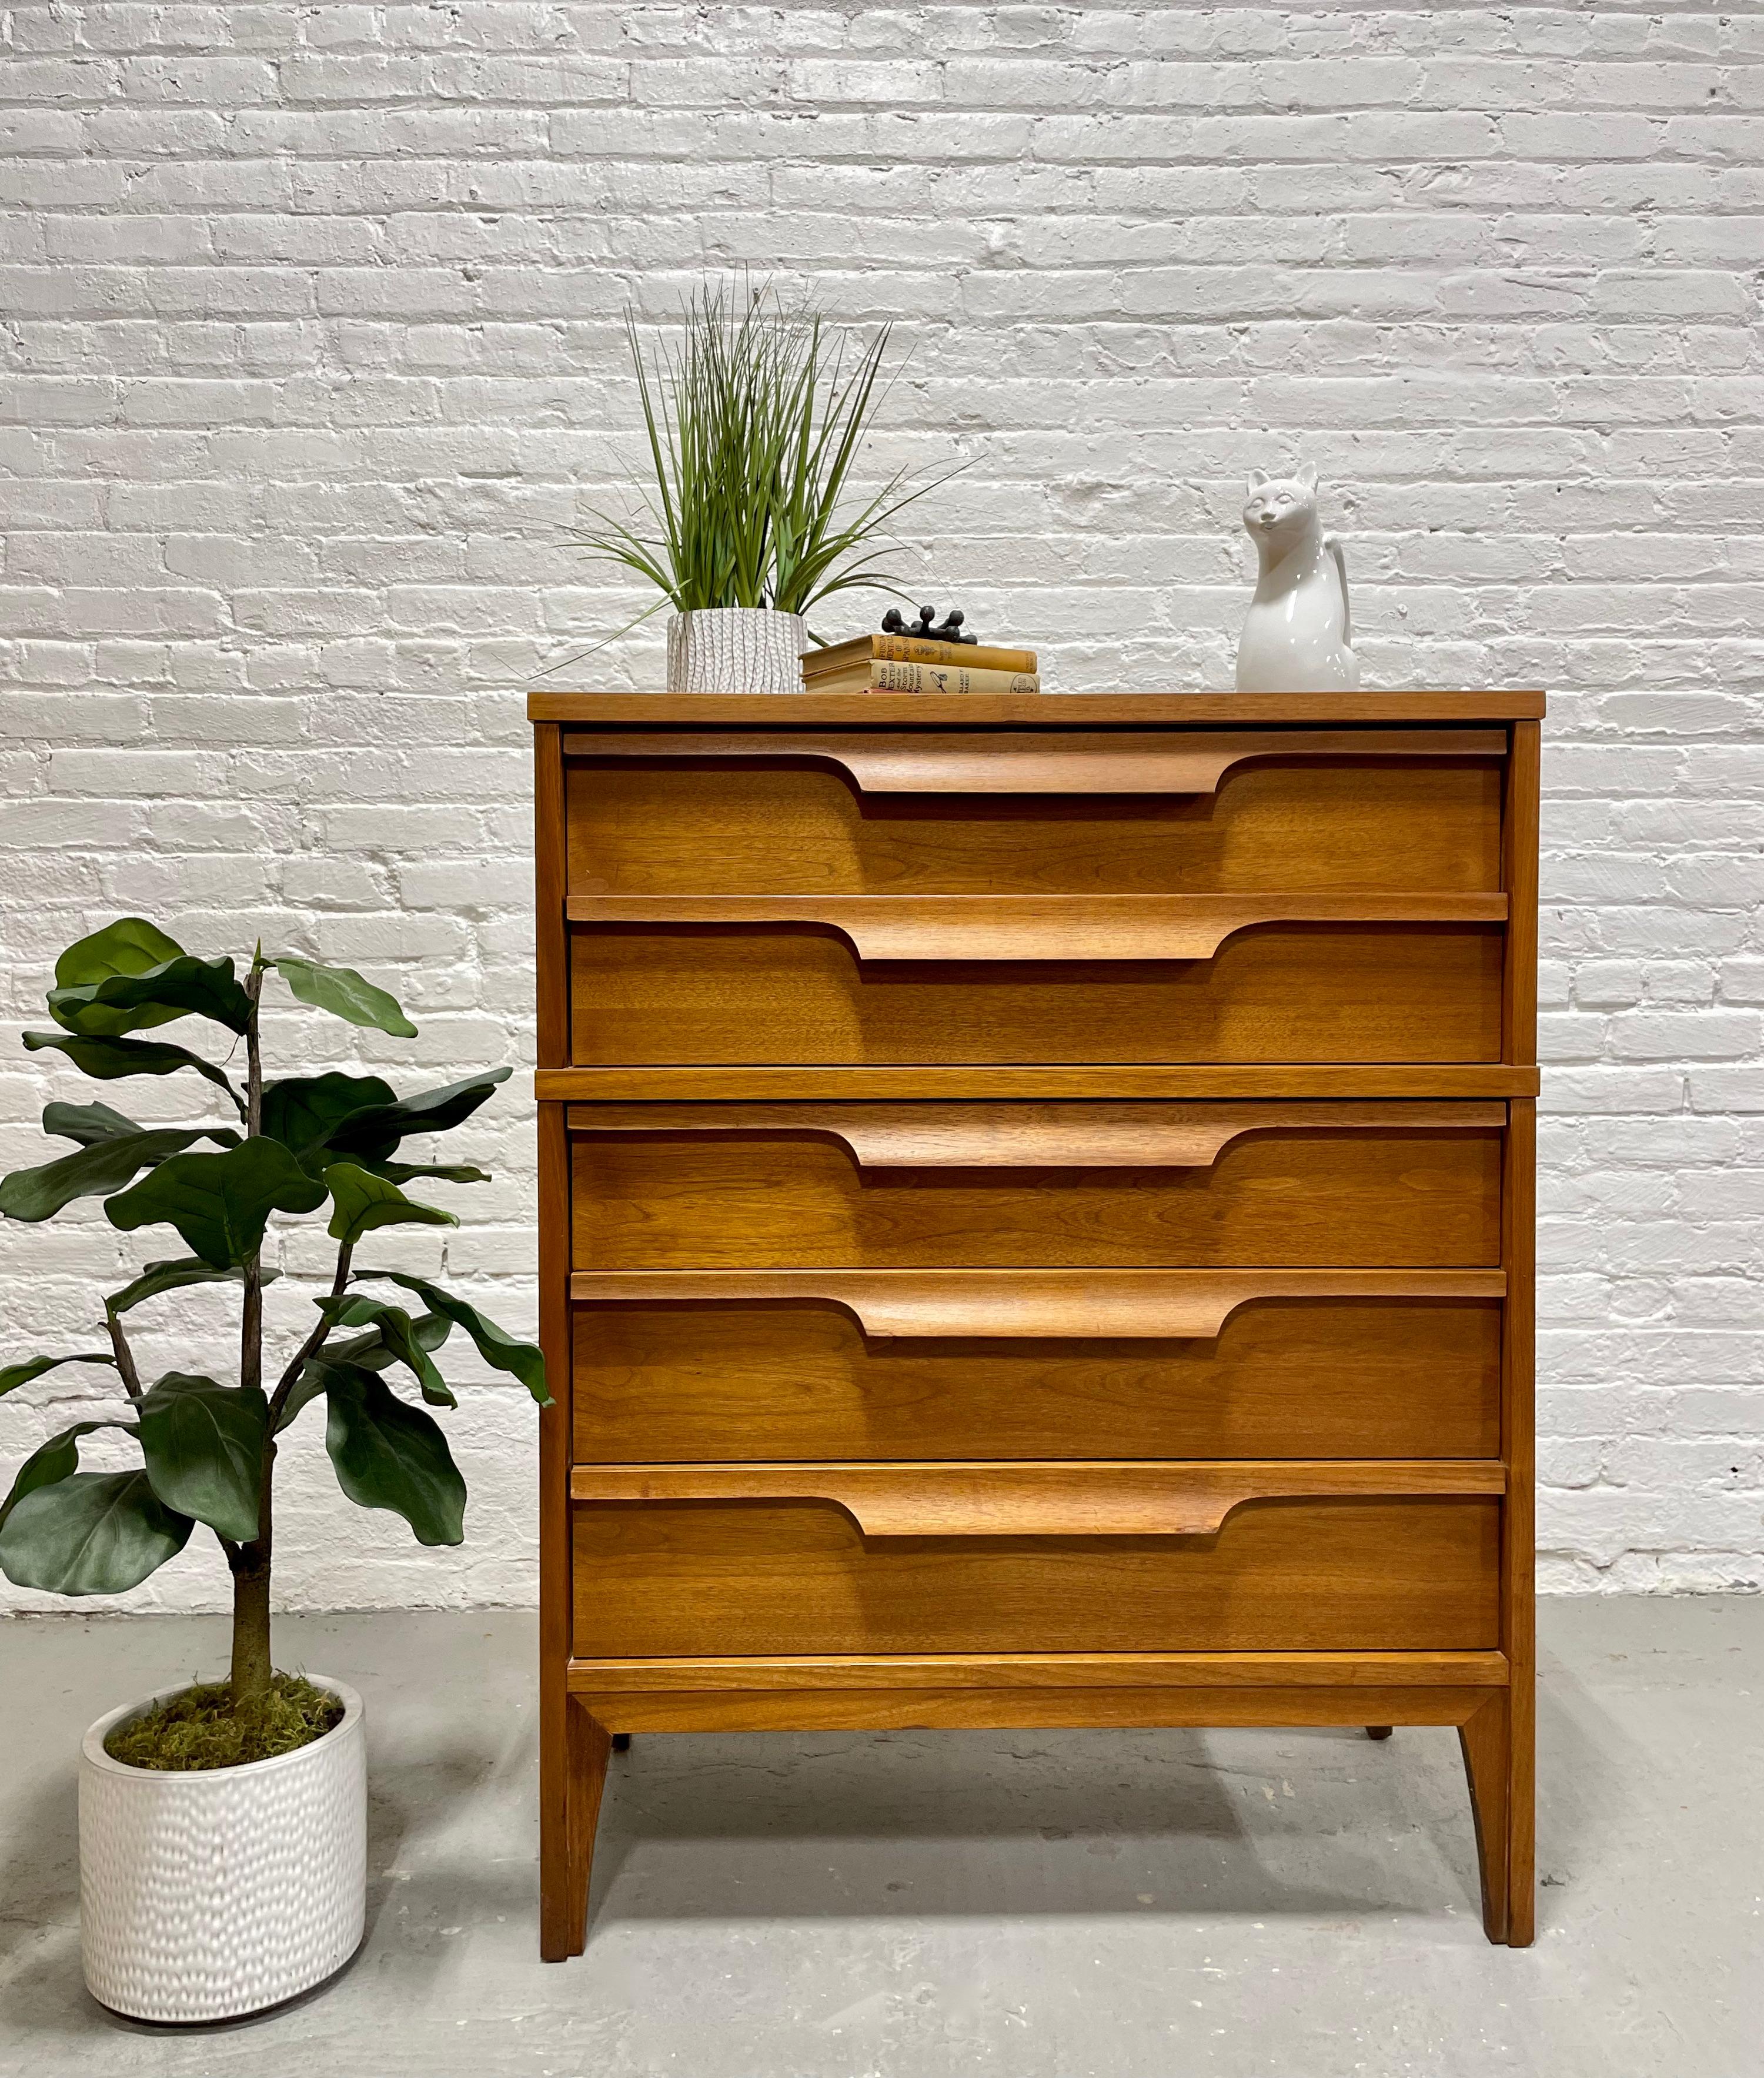 Mid Century Modern Sculpted Dresser by Johnson Carper., c. 1960's.  Beautiful architectural detailing with sculpted drawers. Five spacious dovetailed drawers offer plenty of storage space. Laminated woodgrain tabletop, perfect for sustaining a bit